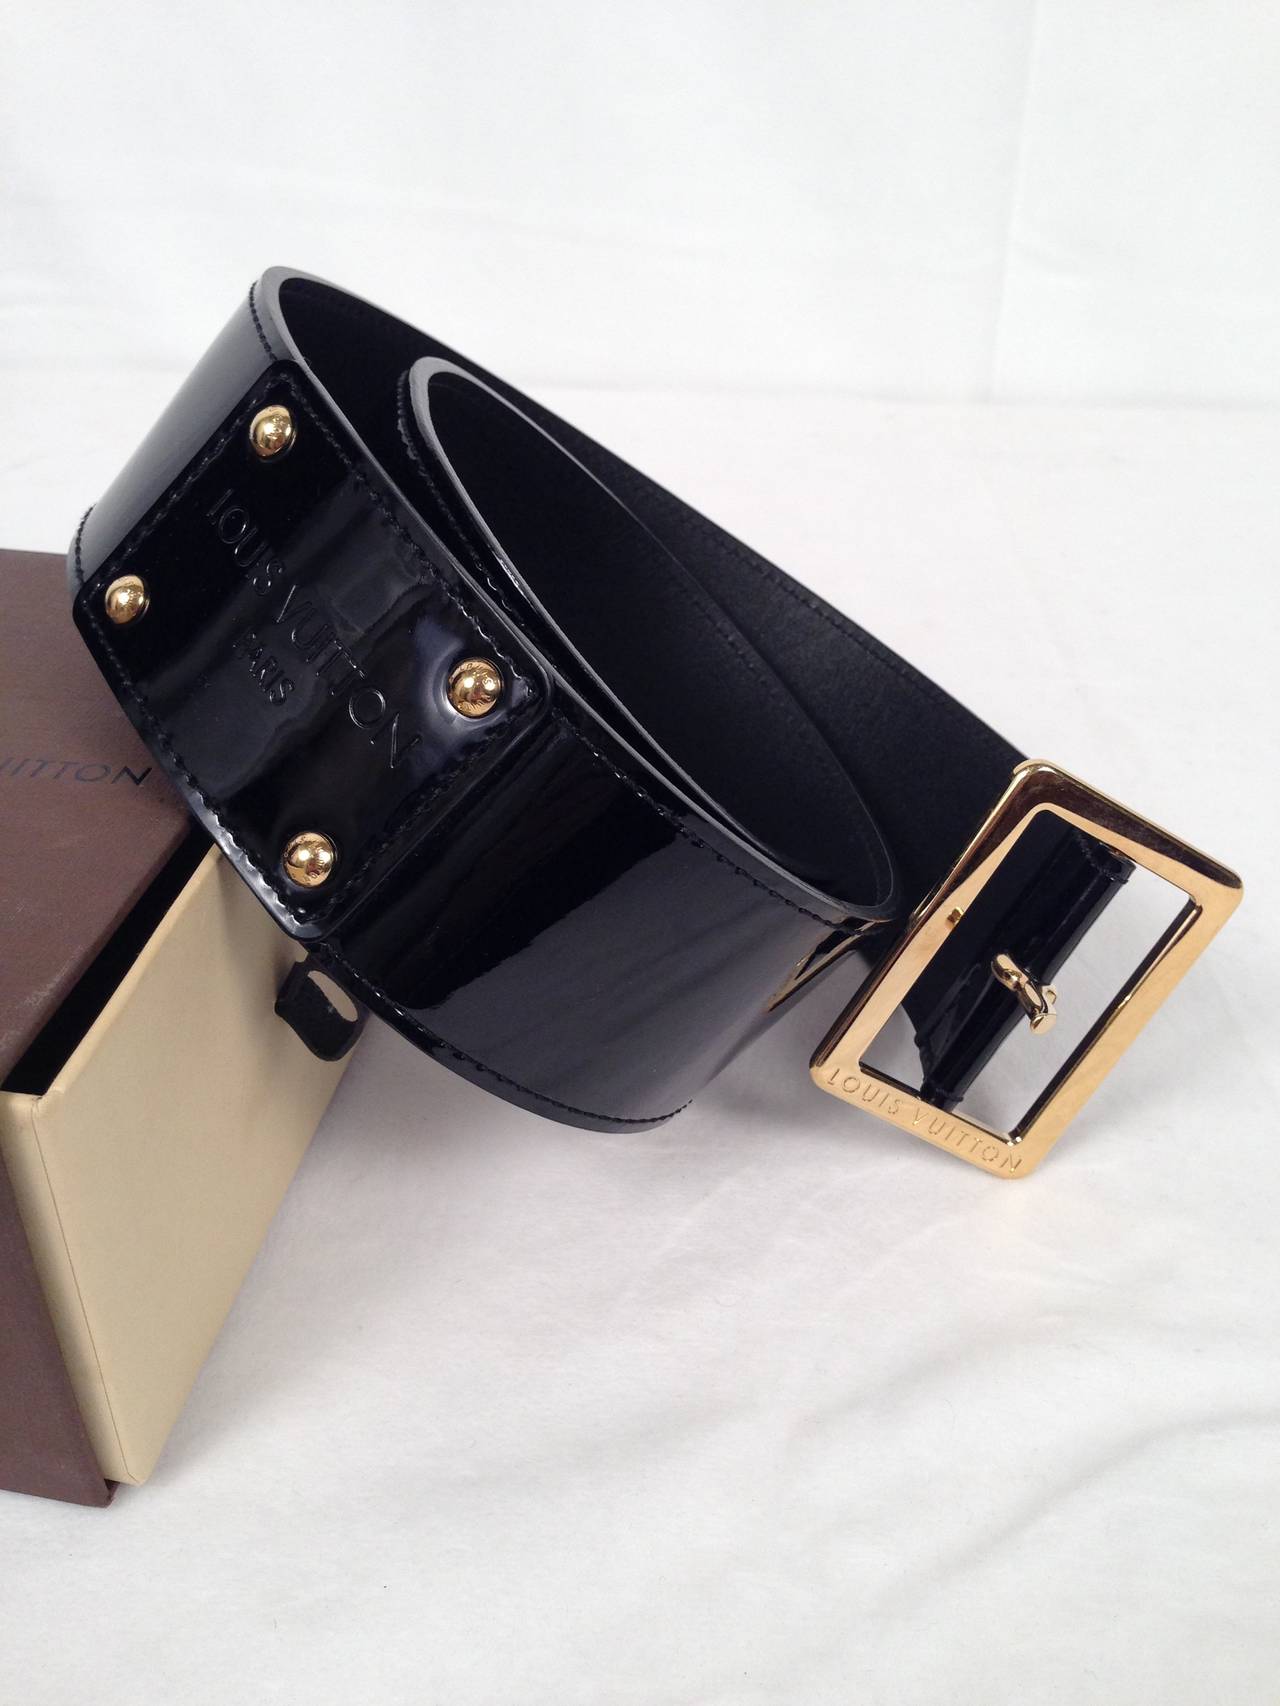 Black but NOT Basic belt from Louis Vuitton!  Luxurious patent leather and gold tone hardware bearing the Louis Vuitton logo makes a lasting impression.  Features rear rectangular patent patch anchored by gold studs bearing the world-famous logo. 